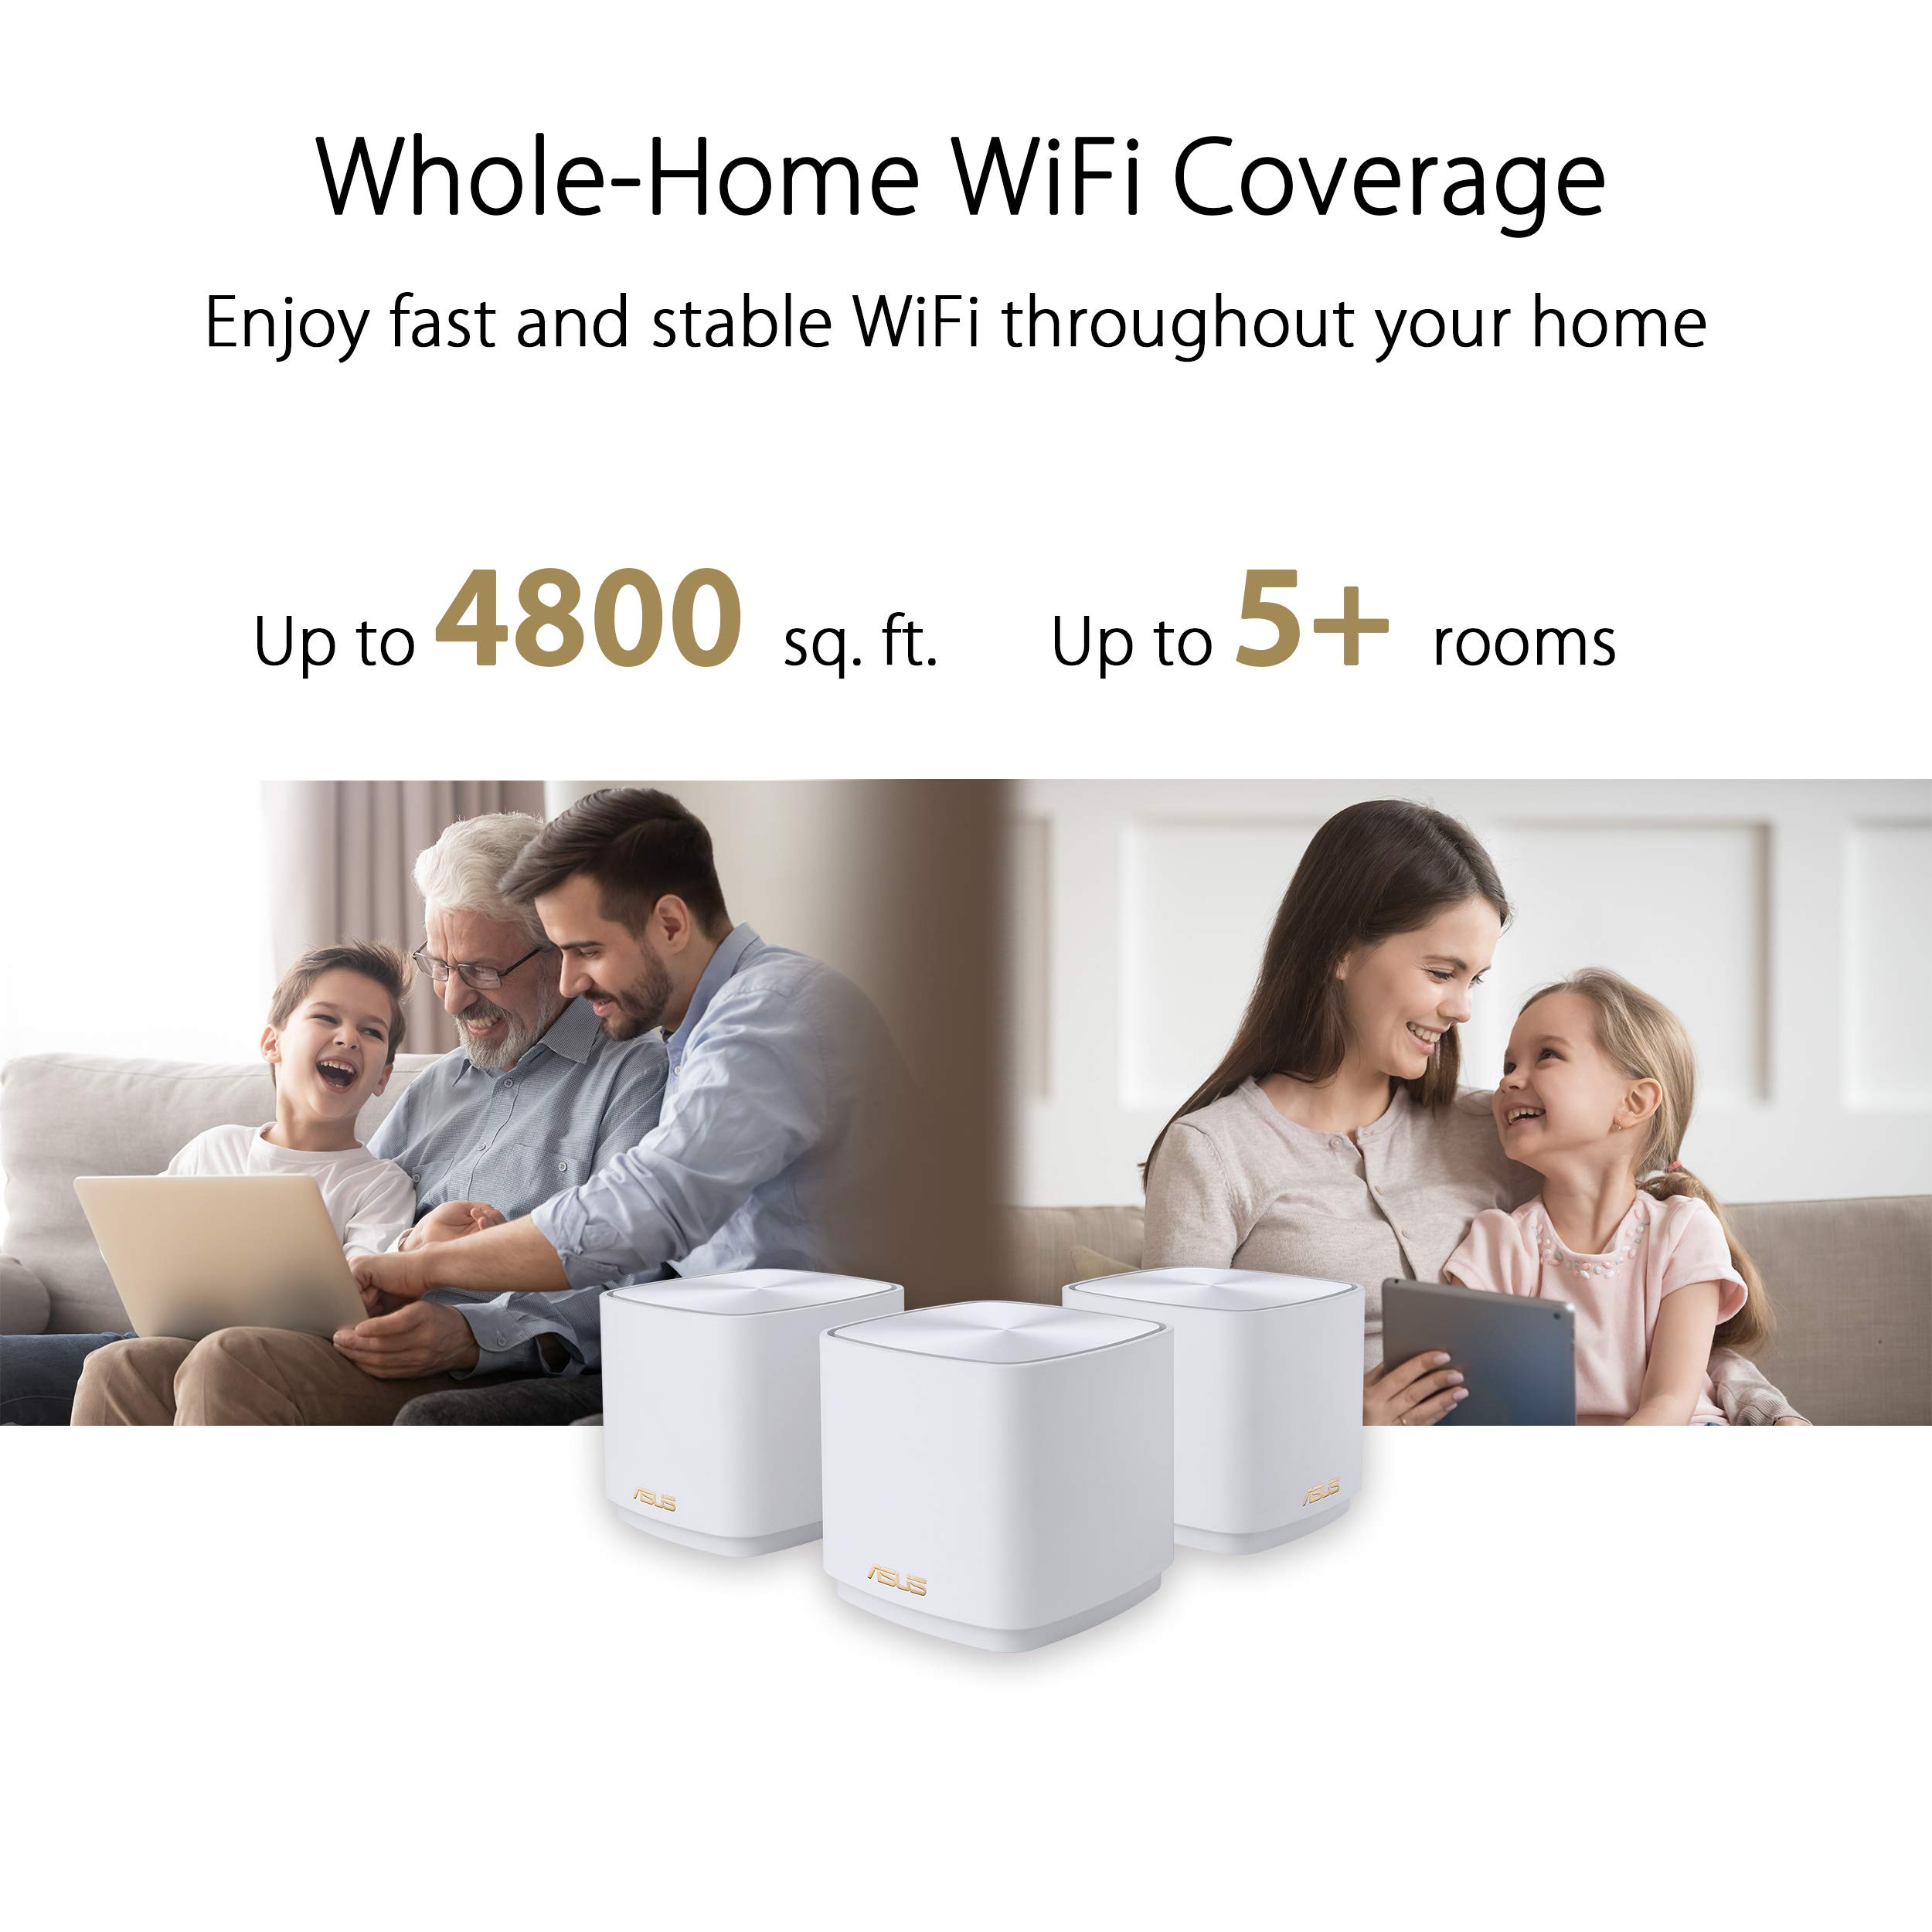 ASUS ZenWiFi XD4 Plus AX1800 Dual-band Mesh WiFi 6 System (XD4 Plus)-Whole home coverage up to 4,800 sq.ft & 25+ devices, 1800Mbps, AiMesh, Lifetime Free Internet Security, Parental Control, EasySetup